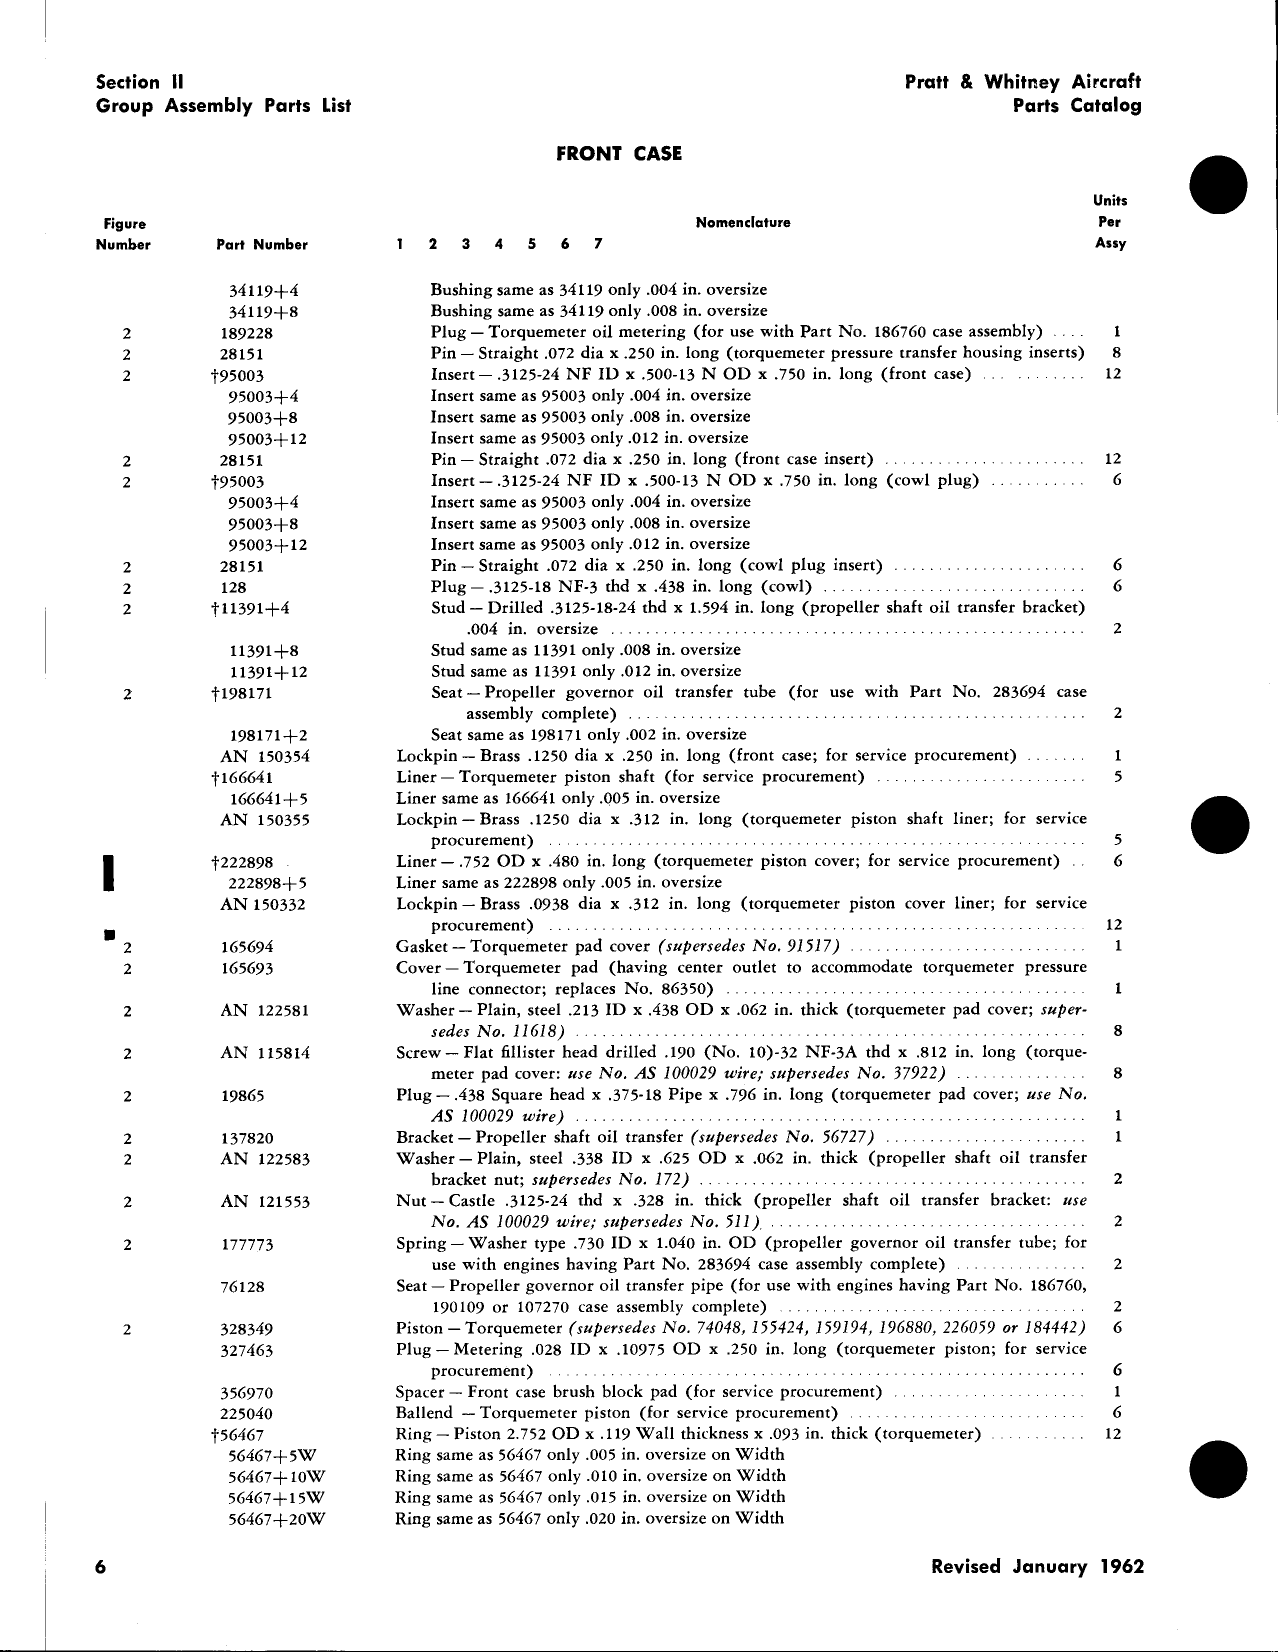 Sample page 9 from AirCorps Library document: R-2800 Double Wasp Parts Catalog